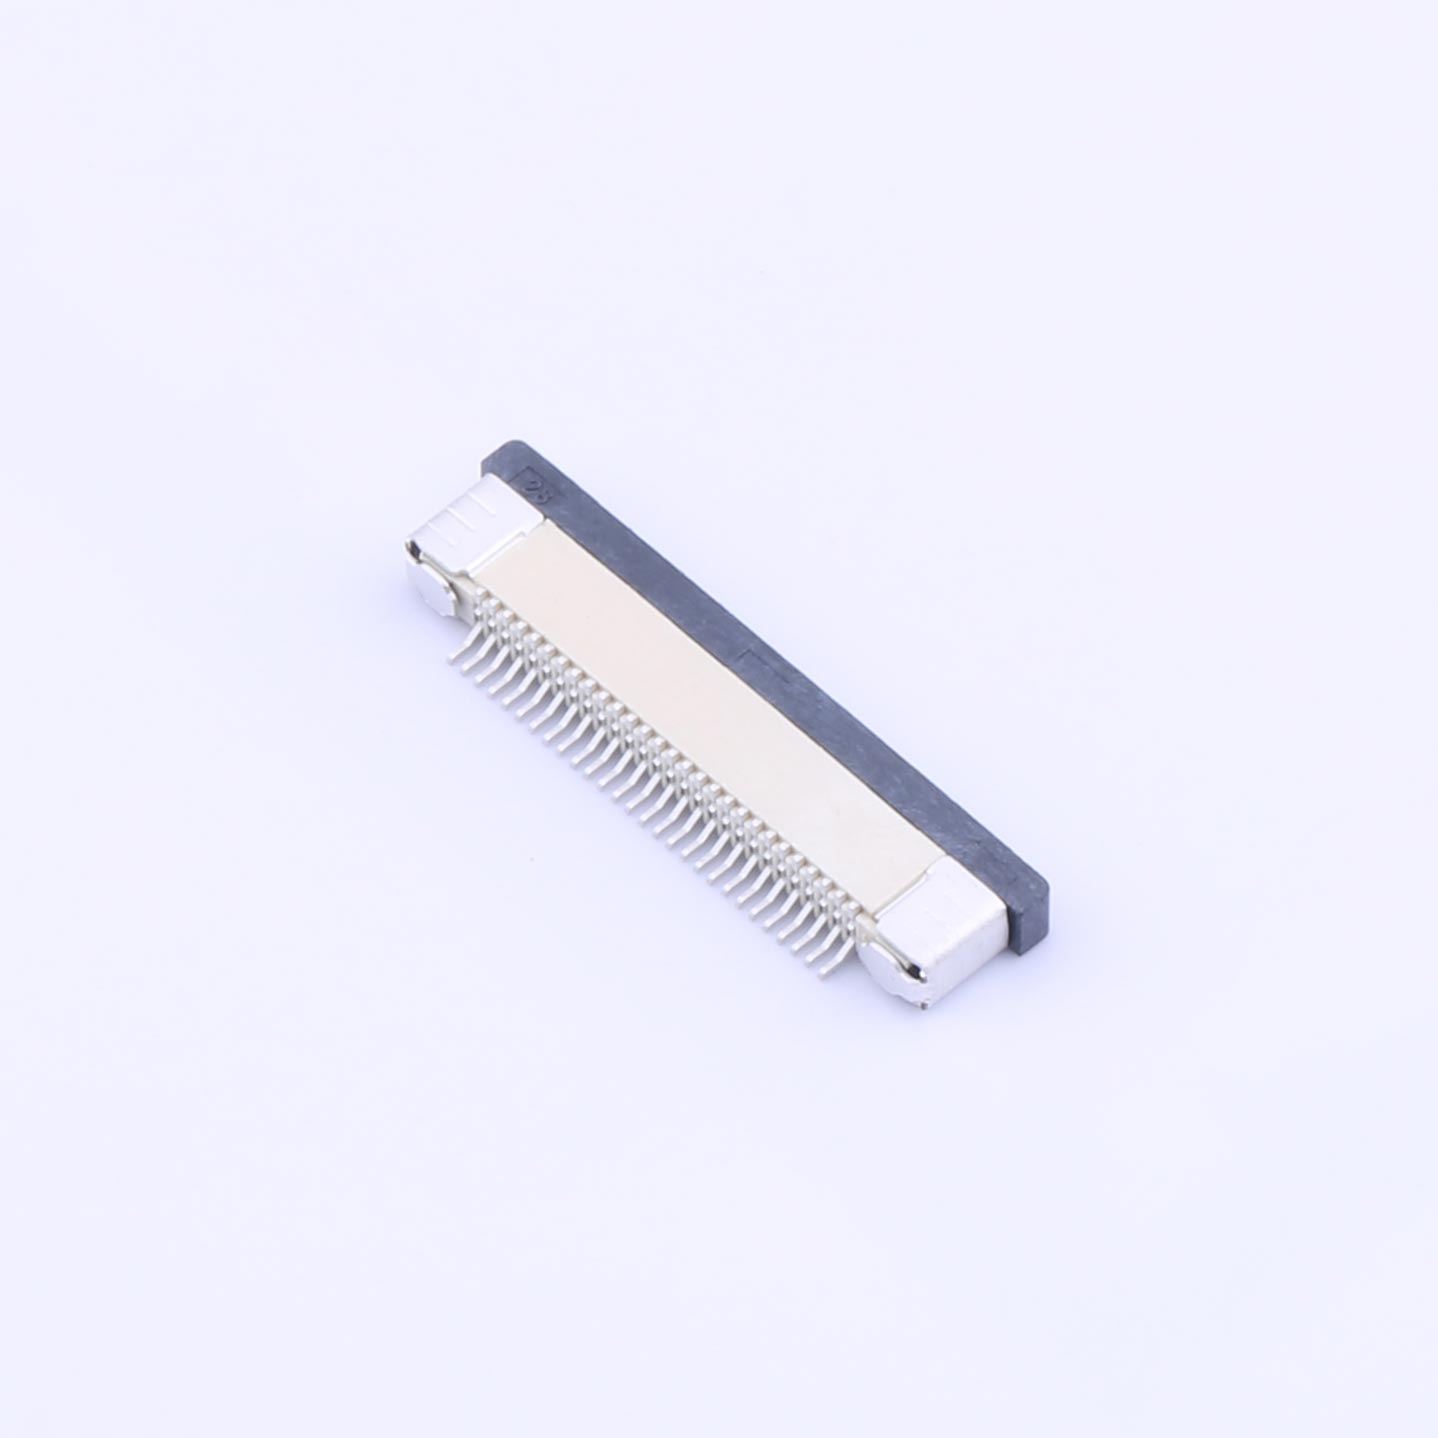 Kinghelm FFC/FPC Connector 28p Pitch 0.5mm - KH-CL0.5-H2.0-28pin